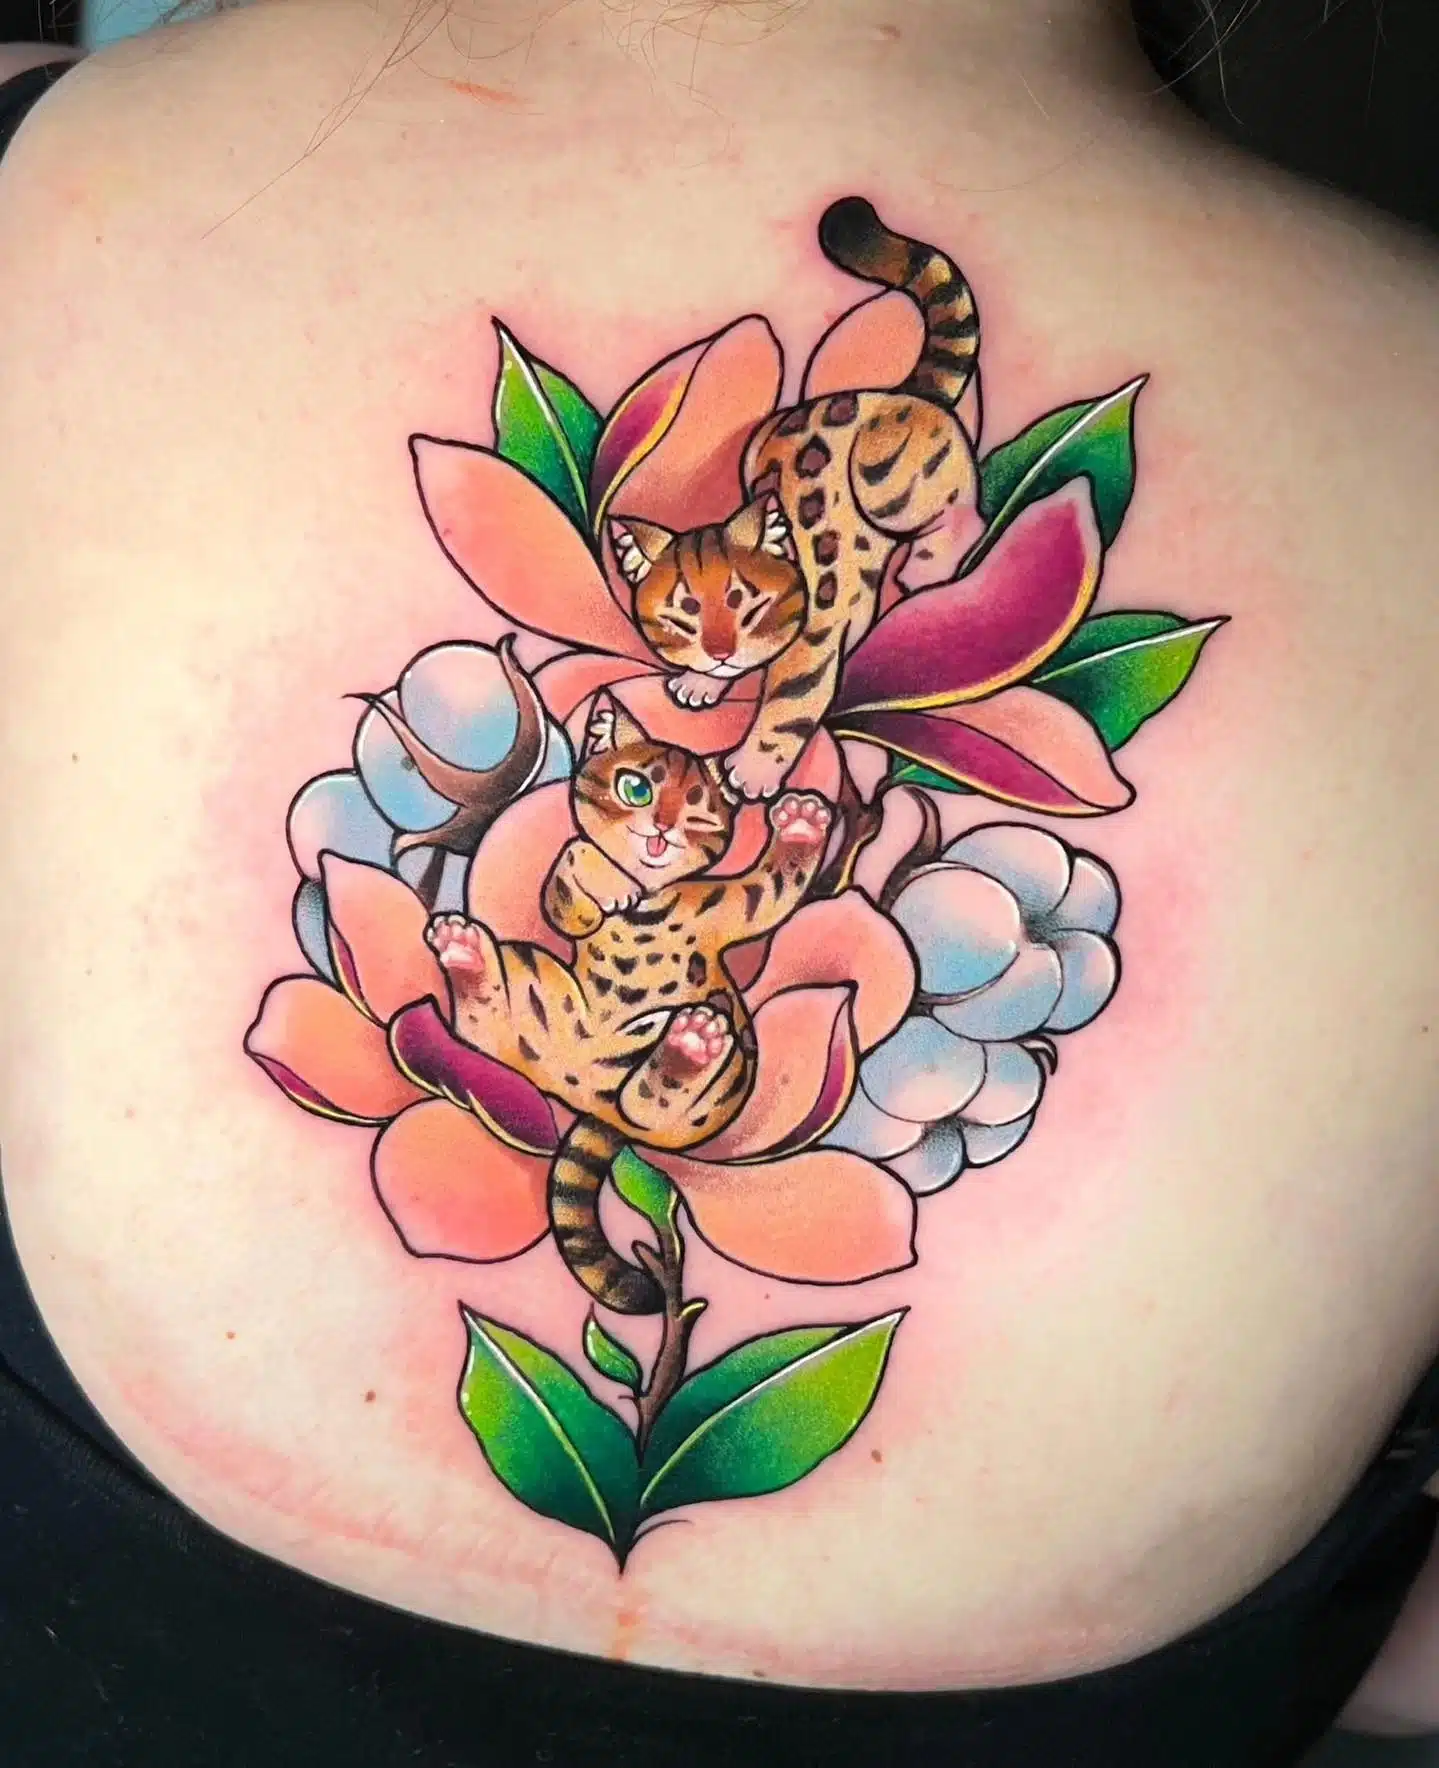 Jackson and Levi! Michelles wee cats immortalised by our Badass Brazilian naaat.j 

Supplies from killerinktattoo 
And care packages from yayofamilia 

Done using:
dankubin 
fusion_ink 
Black coffee

         scottishtattooclub      totaltattoo   tattoosnob